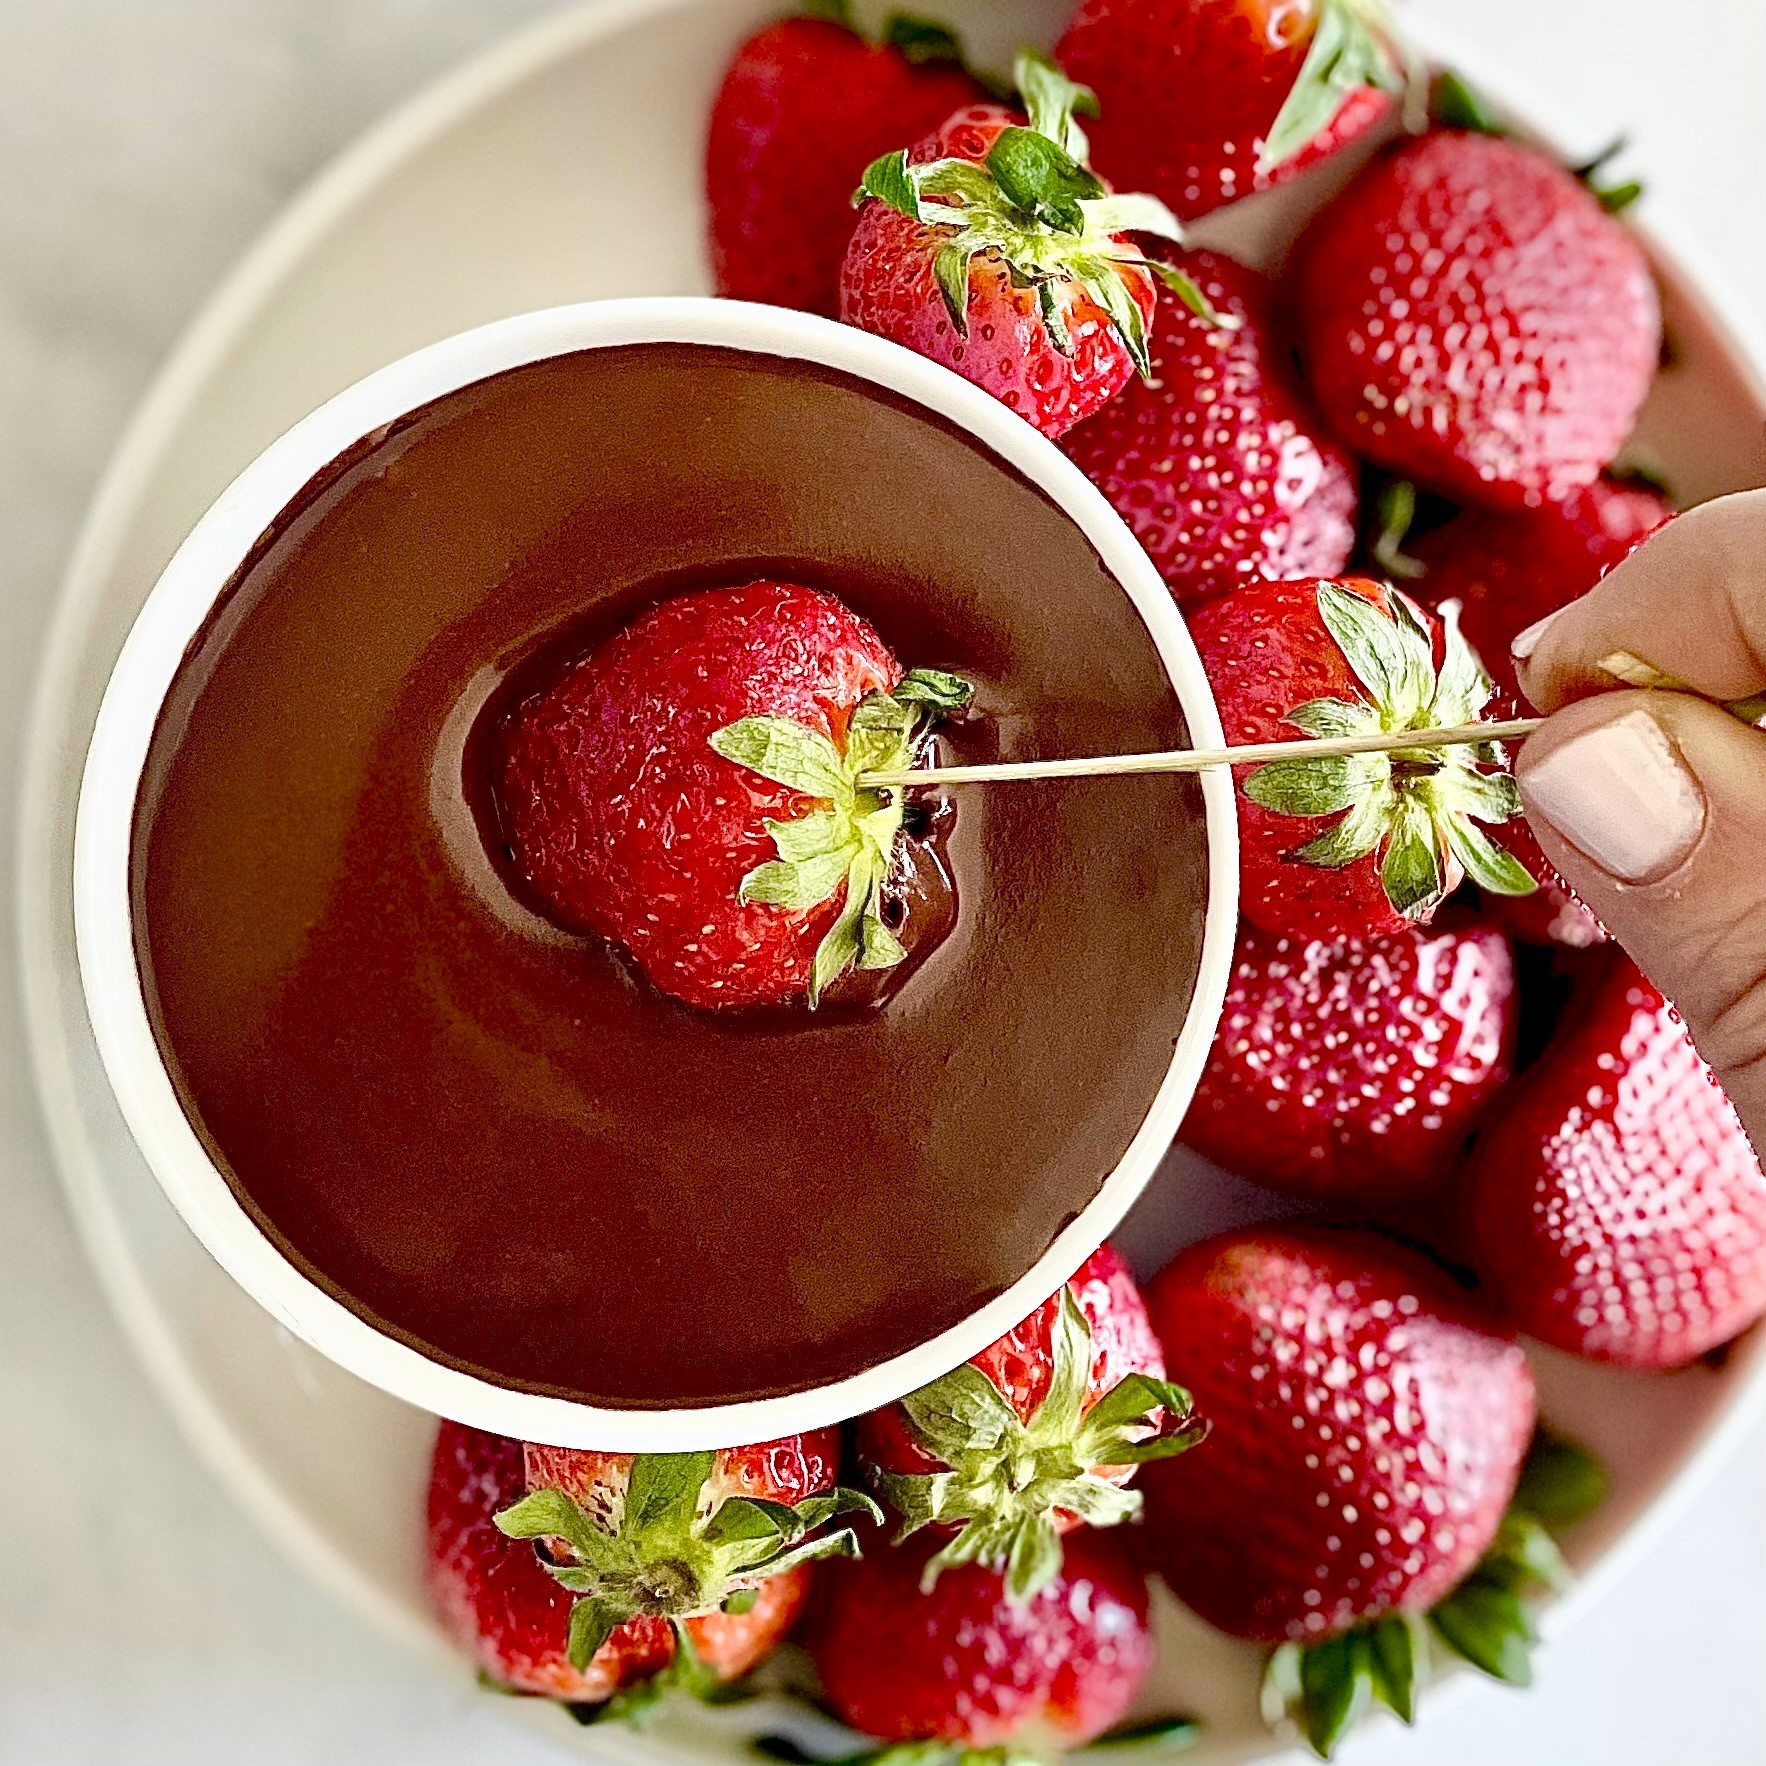 Dunking a strawberry into dark chocolate fondue sauce with plate of fresh strawberries